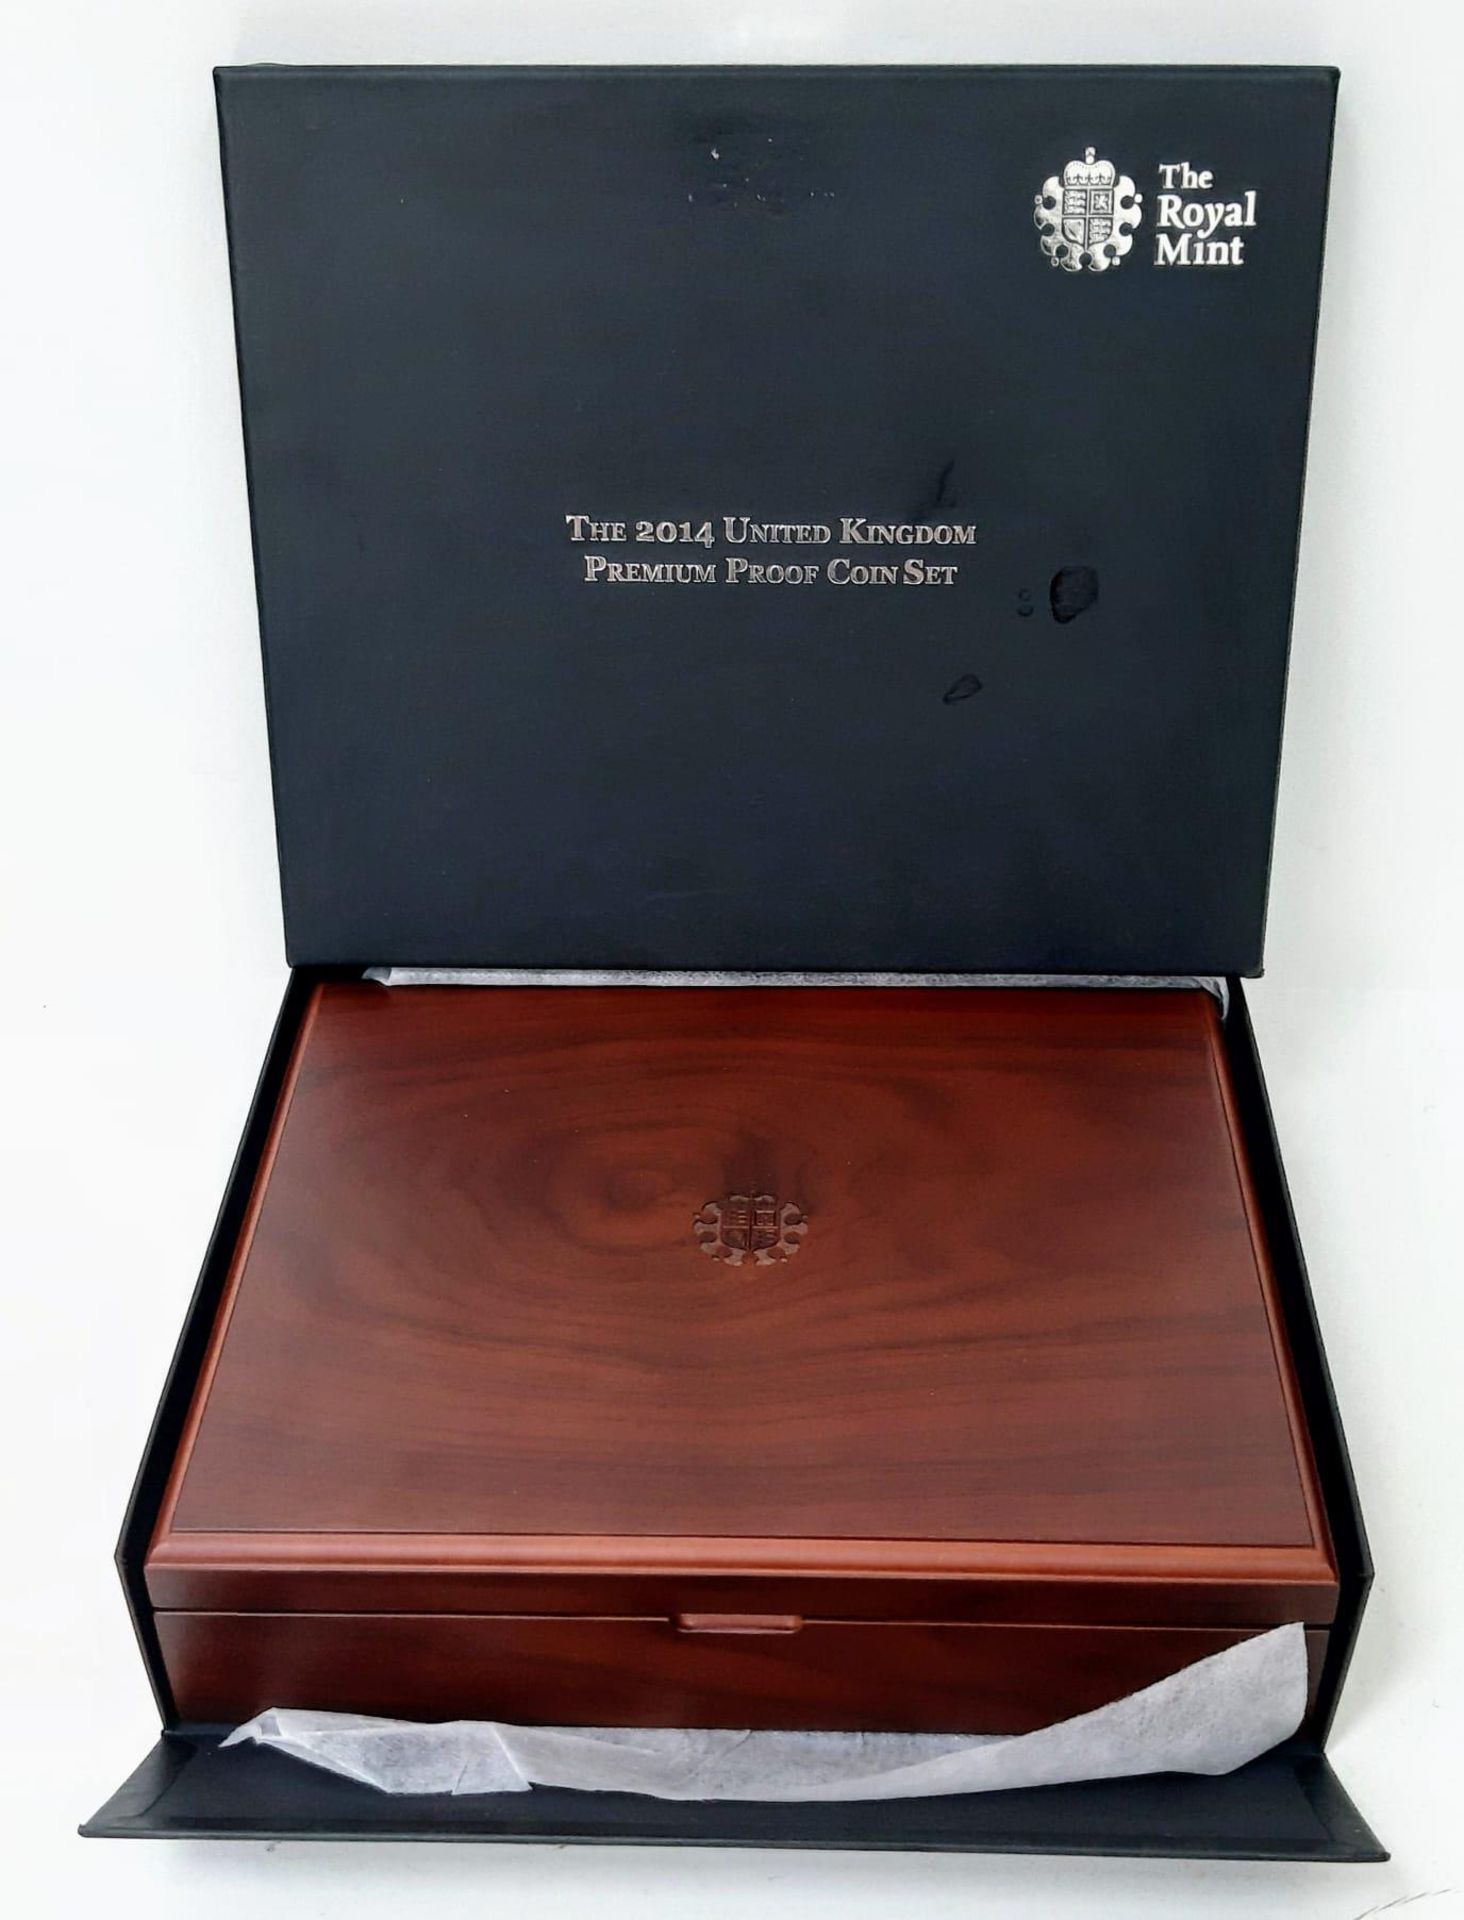 The Royal Mint 2014 United Kingdom Premium Proof 15 Coin Set. Slight marks on exterior box but the - Image 7 of 8